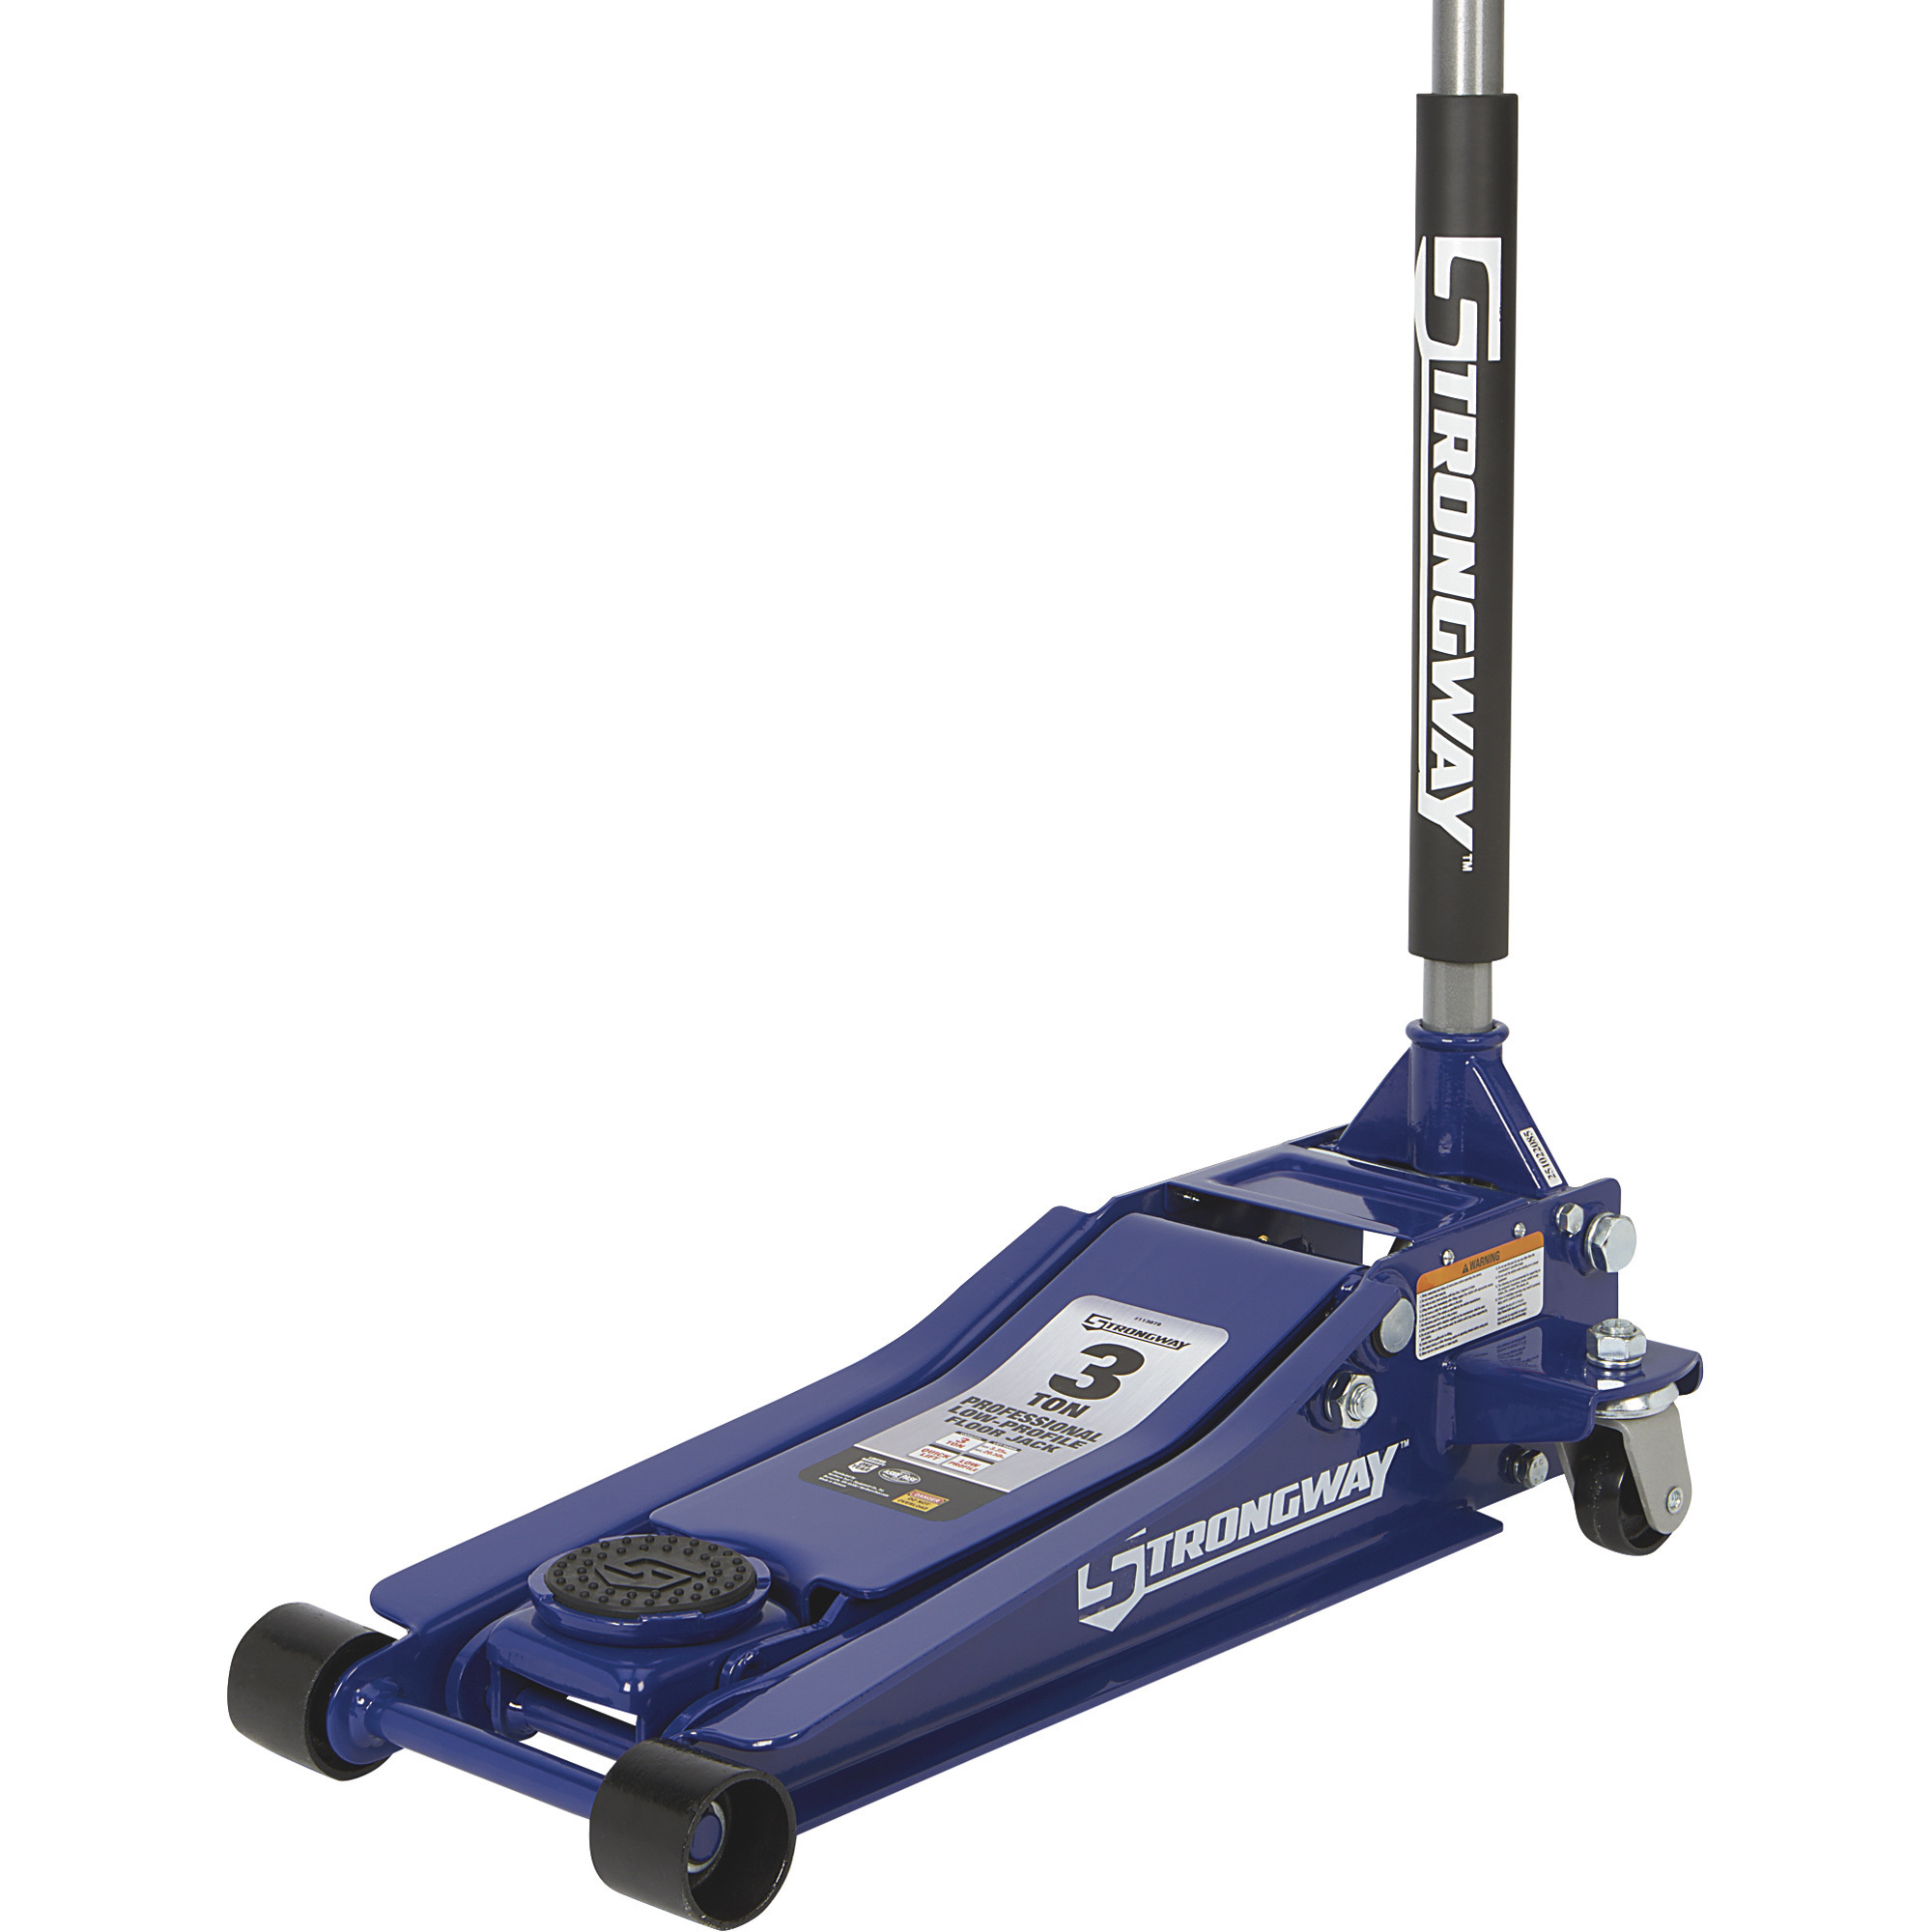 Strongway Professional Low-Profile Service Floor Jack â 3-Ton Capacity